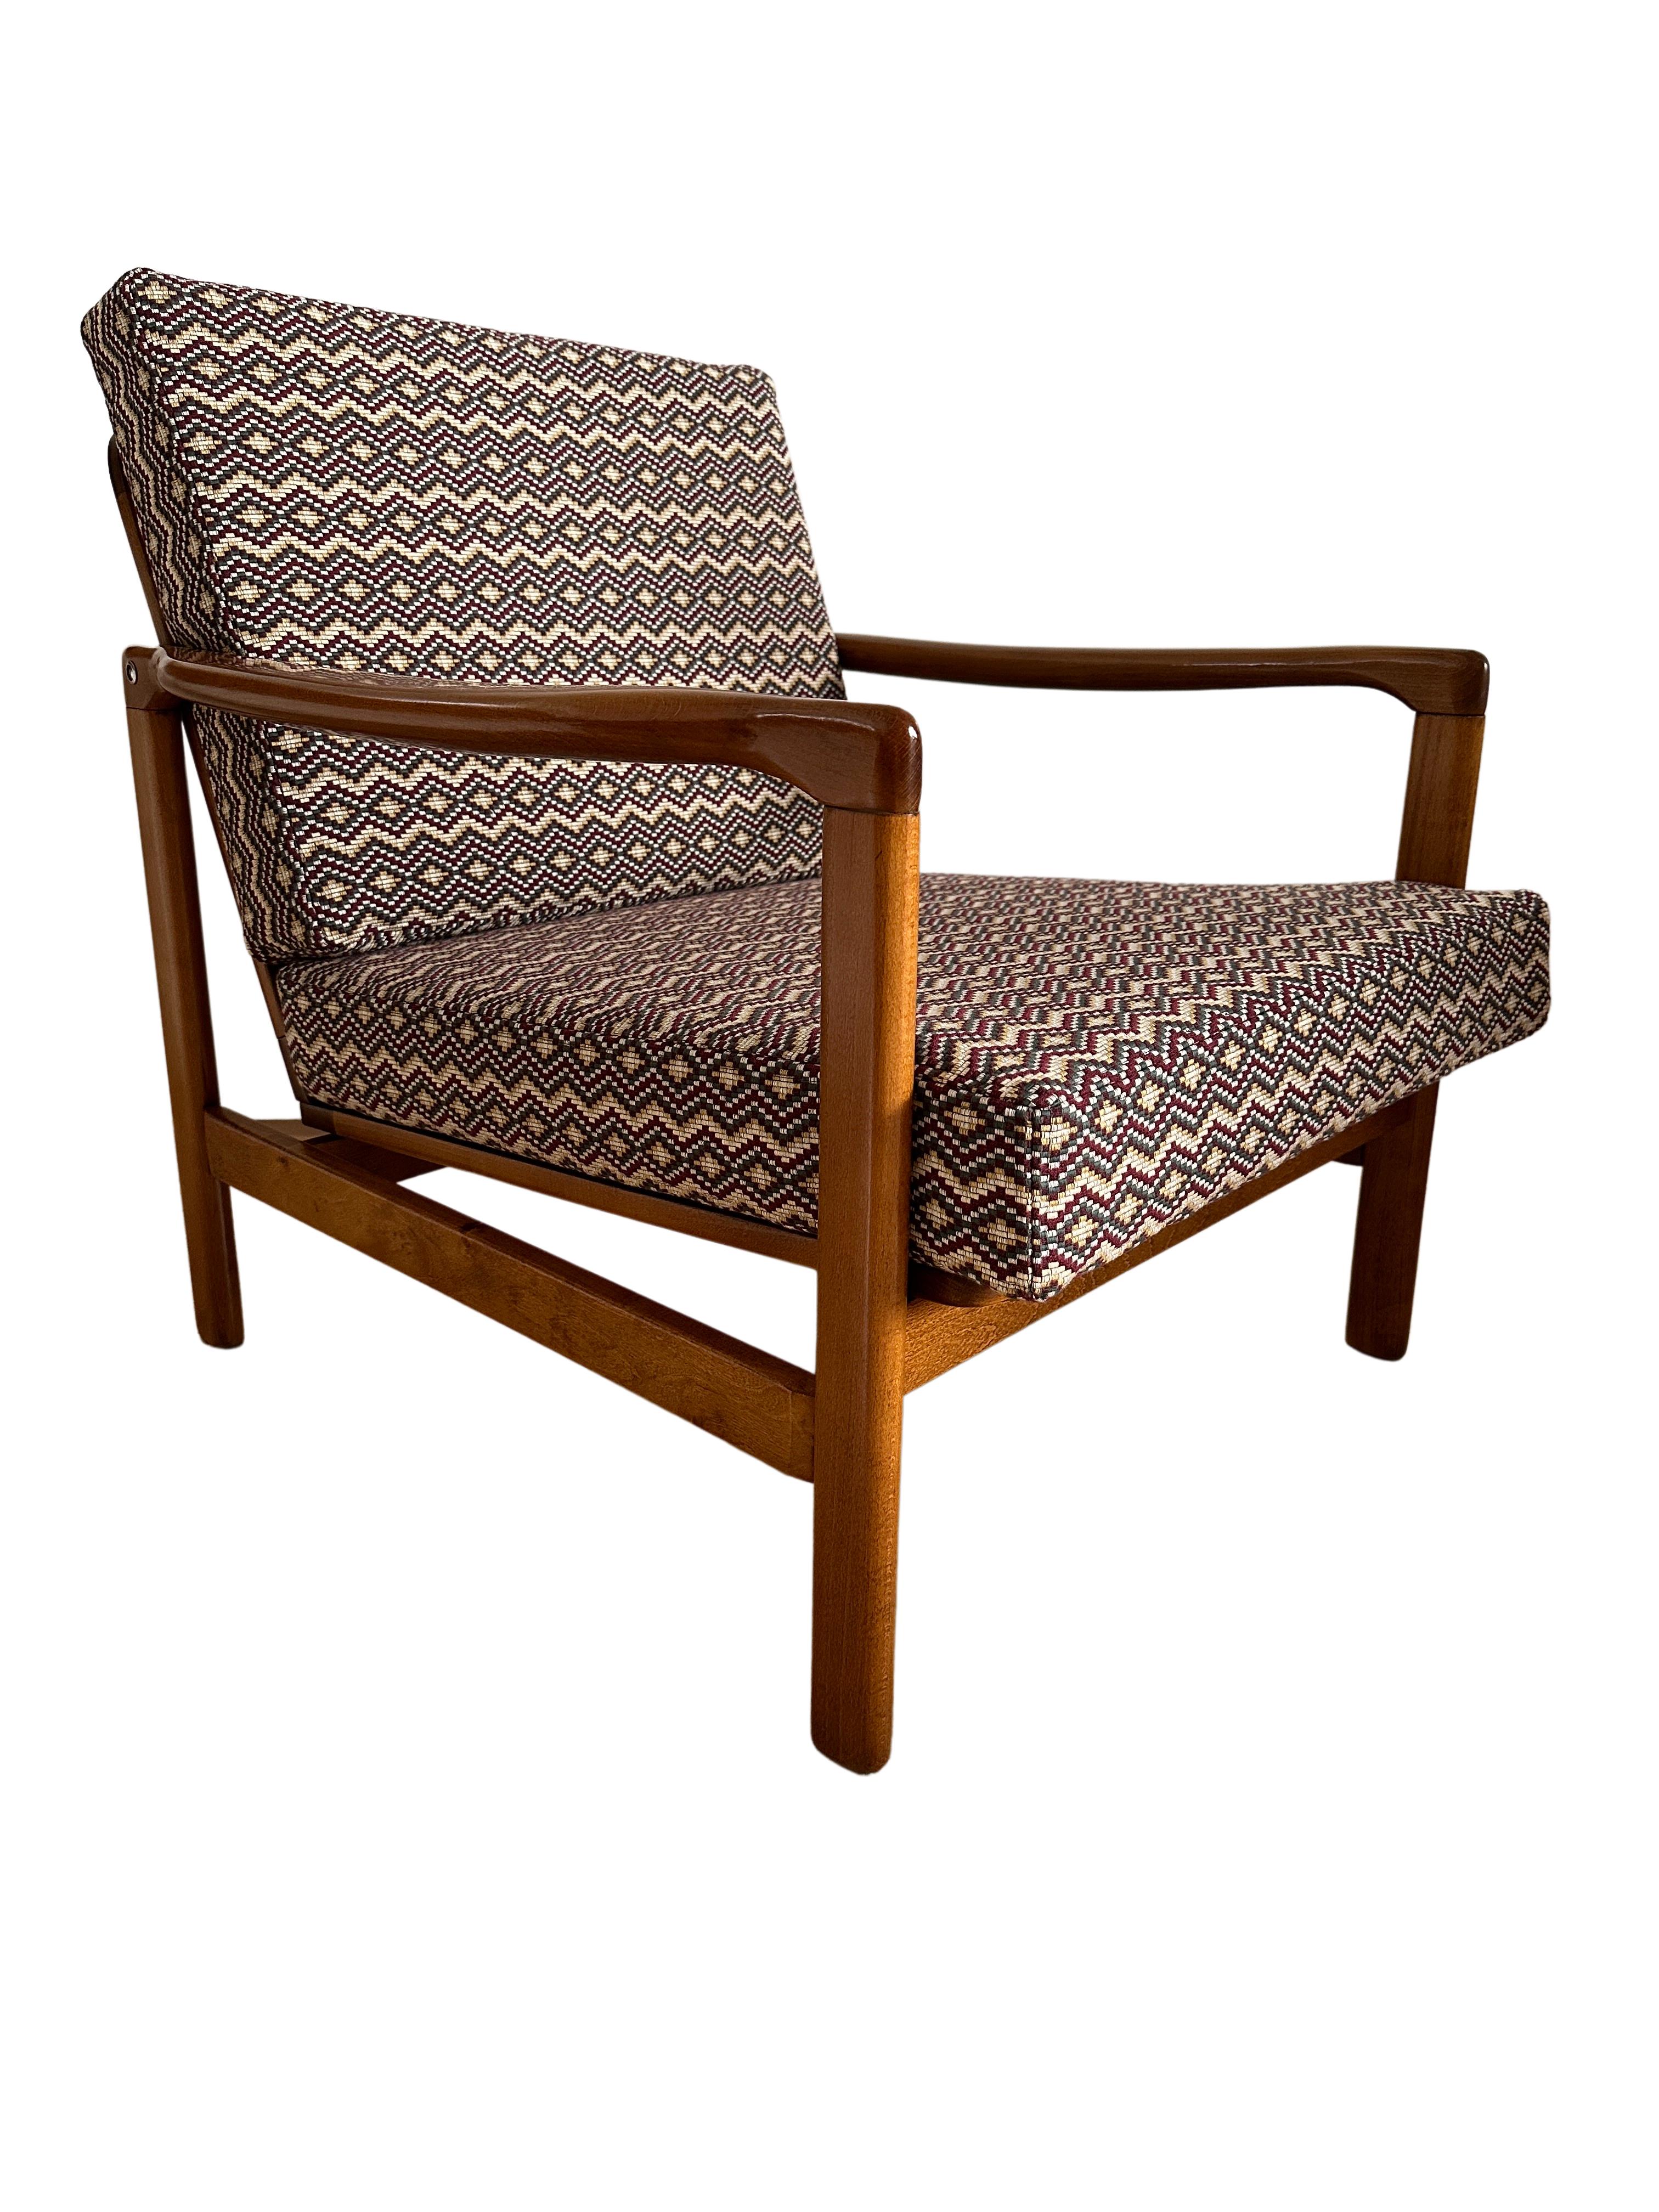 Set of Two Armchairs, Light Wood, Gaston Y Daniela Upholstery, Europe, 1960s For Sale 9